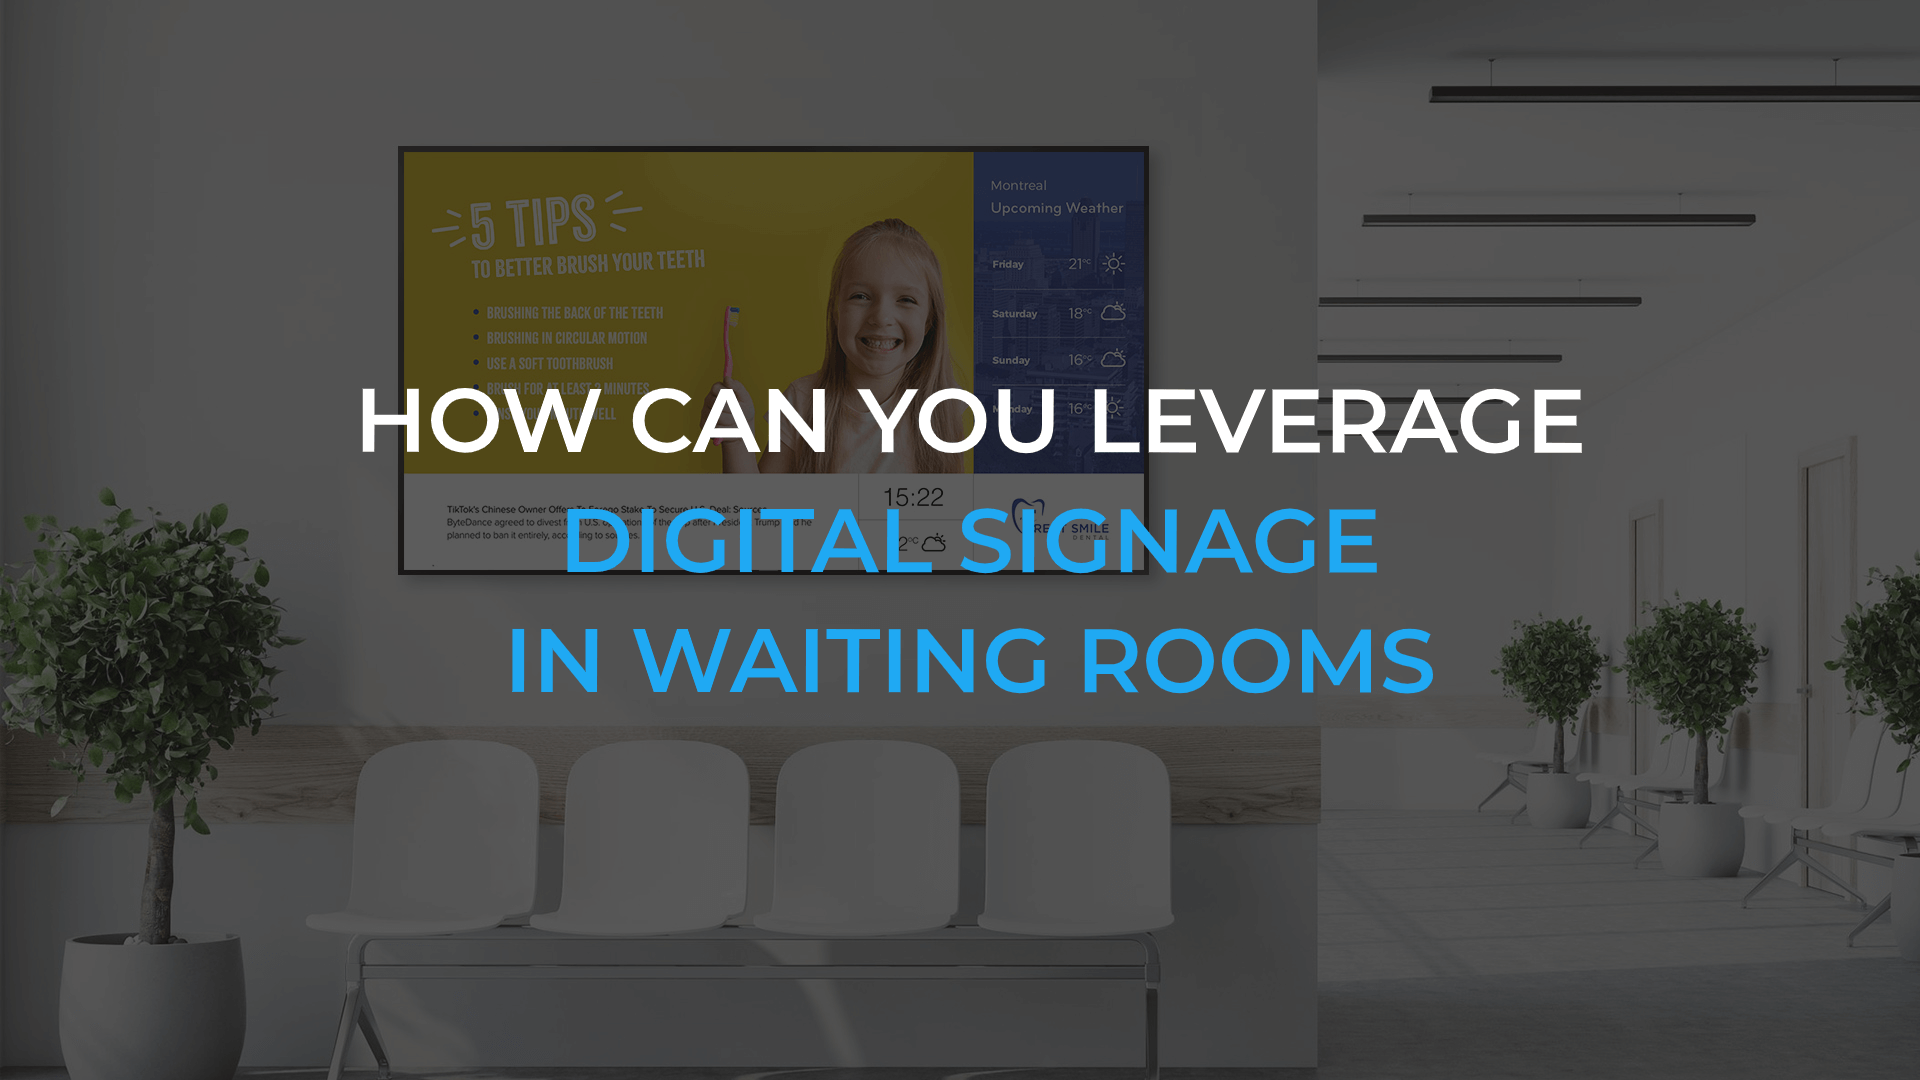 How can you leverage digital signage in waiting rooms?